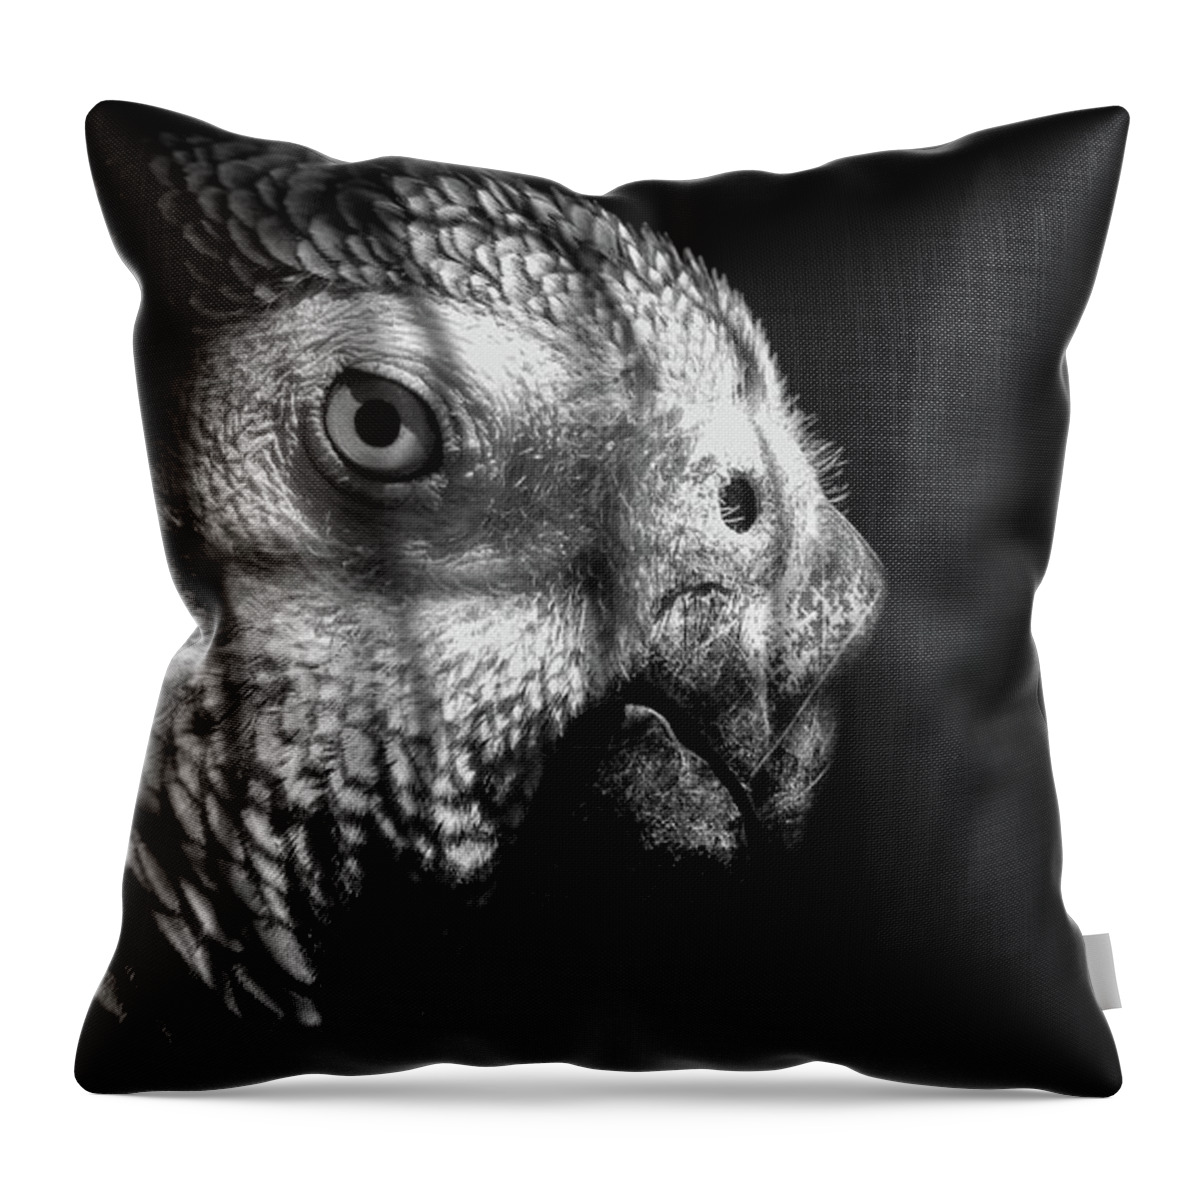 Angry Throw Pillow featuring the photograph Caged Parrot by Mike Fusaro